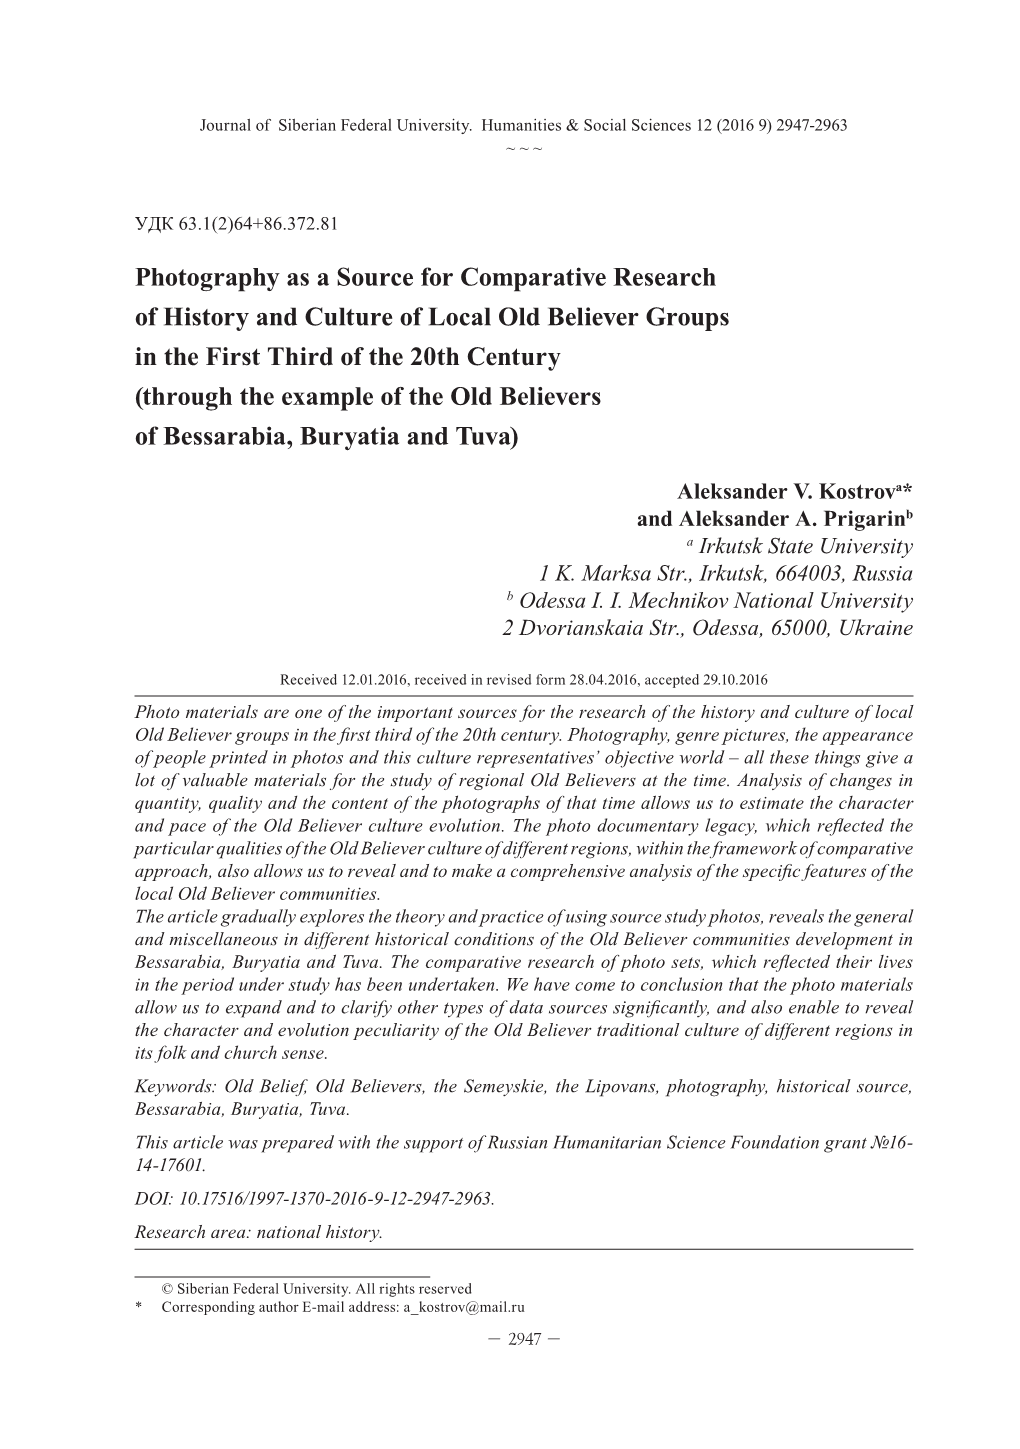 Photography As a Source for Comparative Research of History And